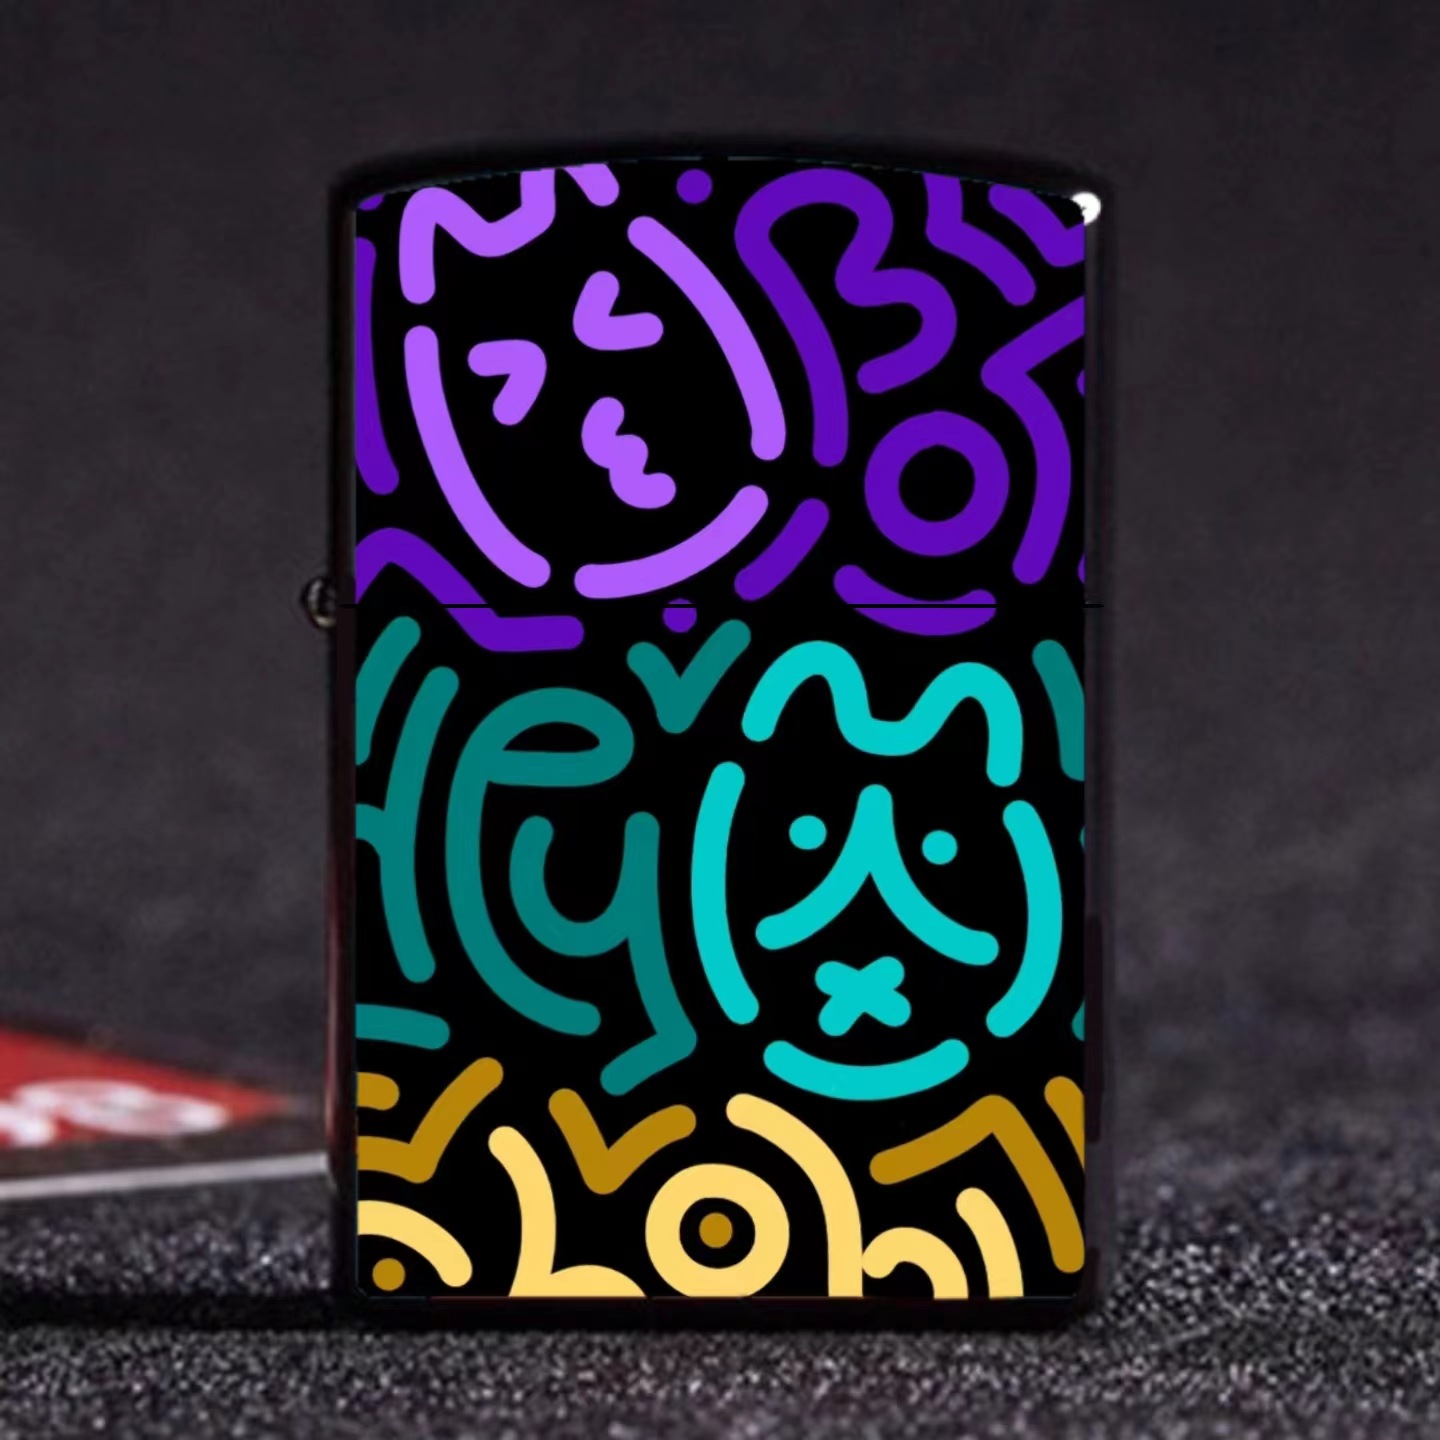 AJ Kerosene Lighter Game Classic Creative Metal Windproof Lighter Sea King Dopamine Refers to Who Makes a Fortune